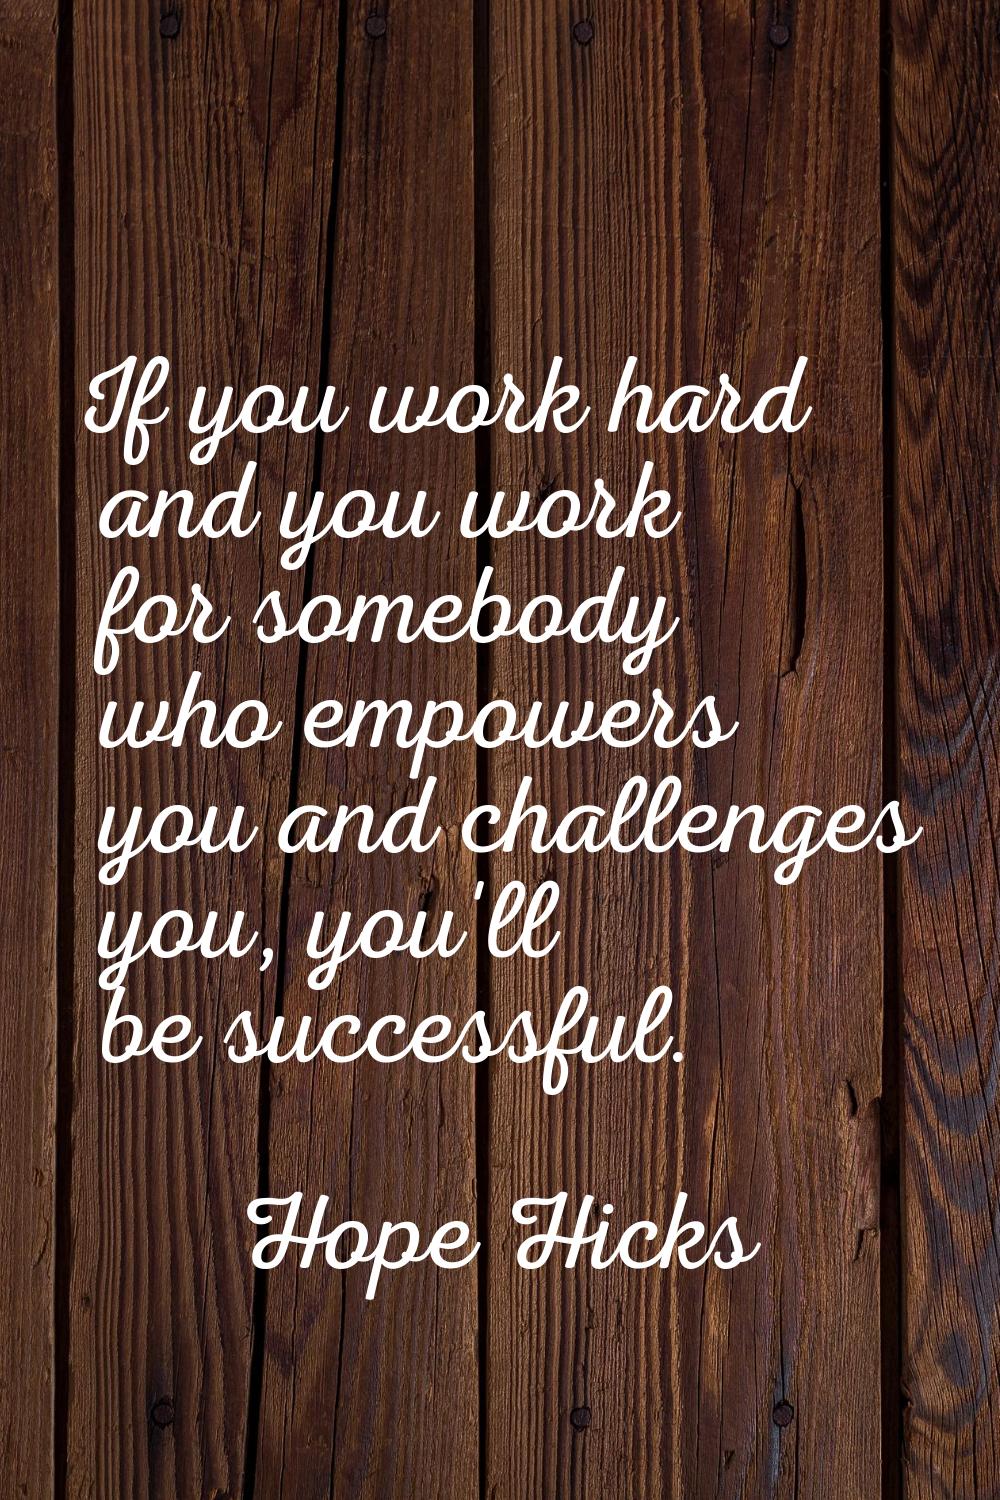 If you work hard and you work for somebody who empowers you and challenges you, you'll be successfu